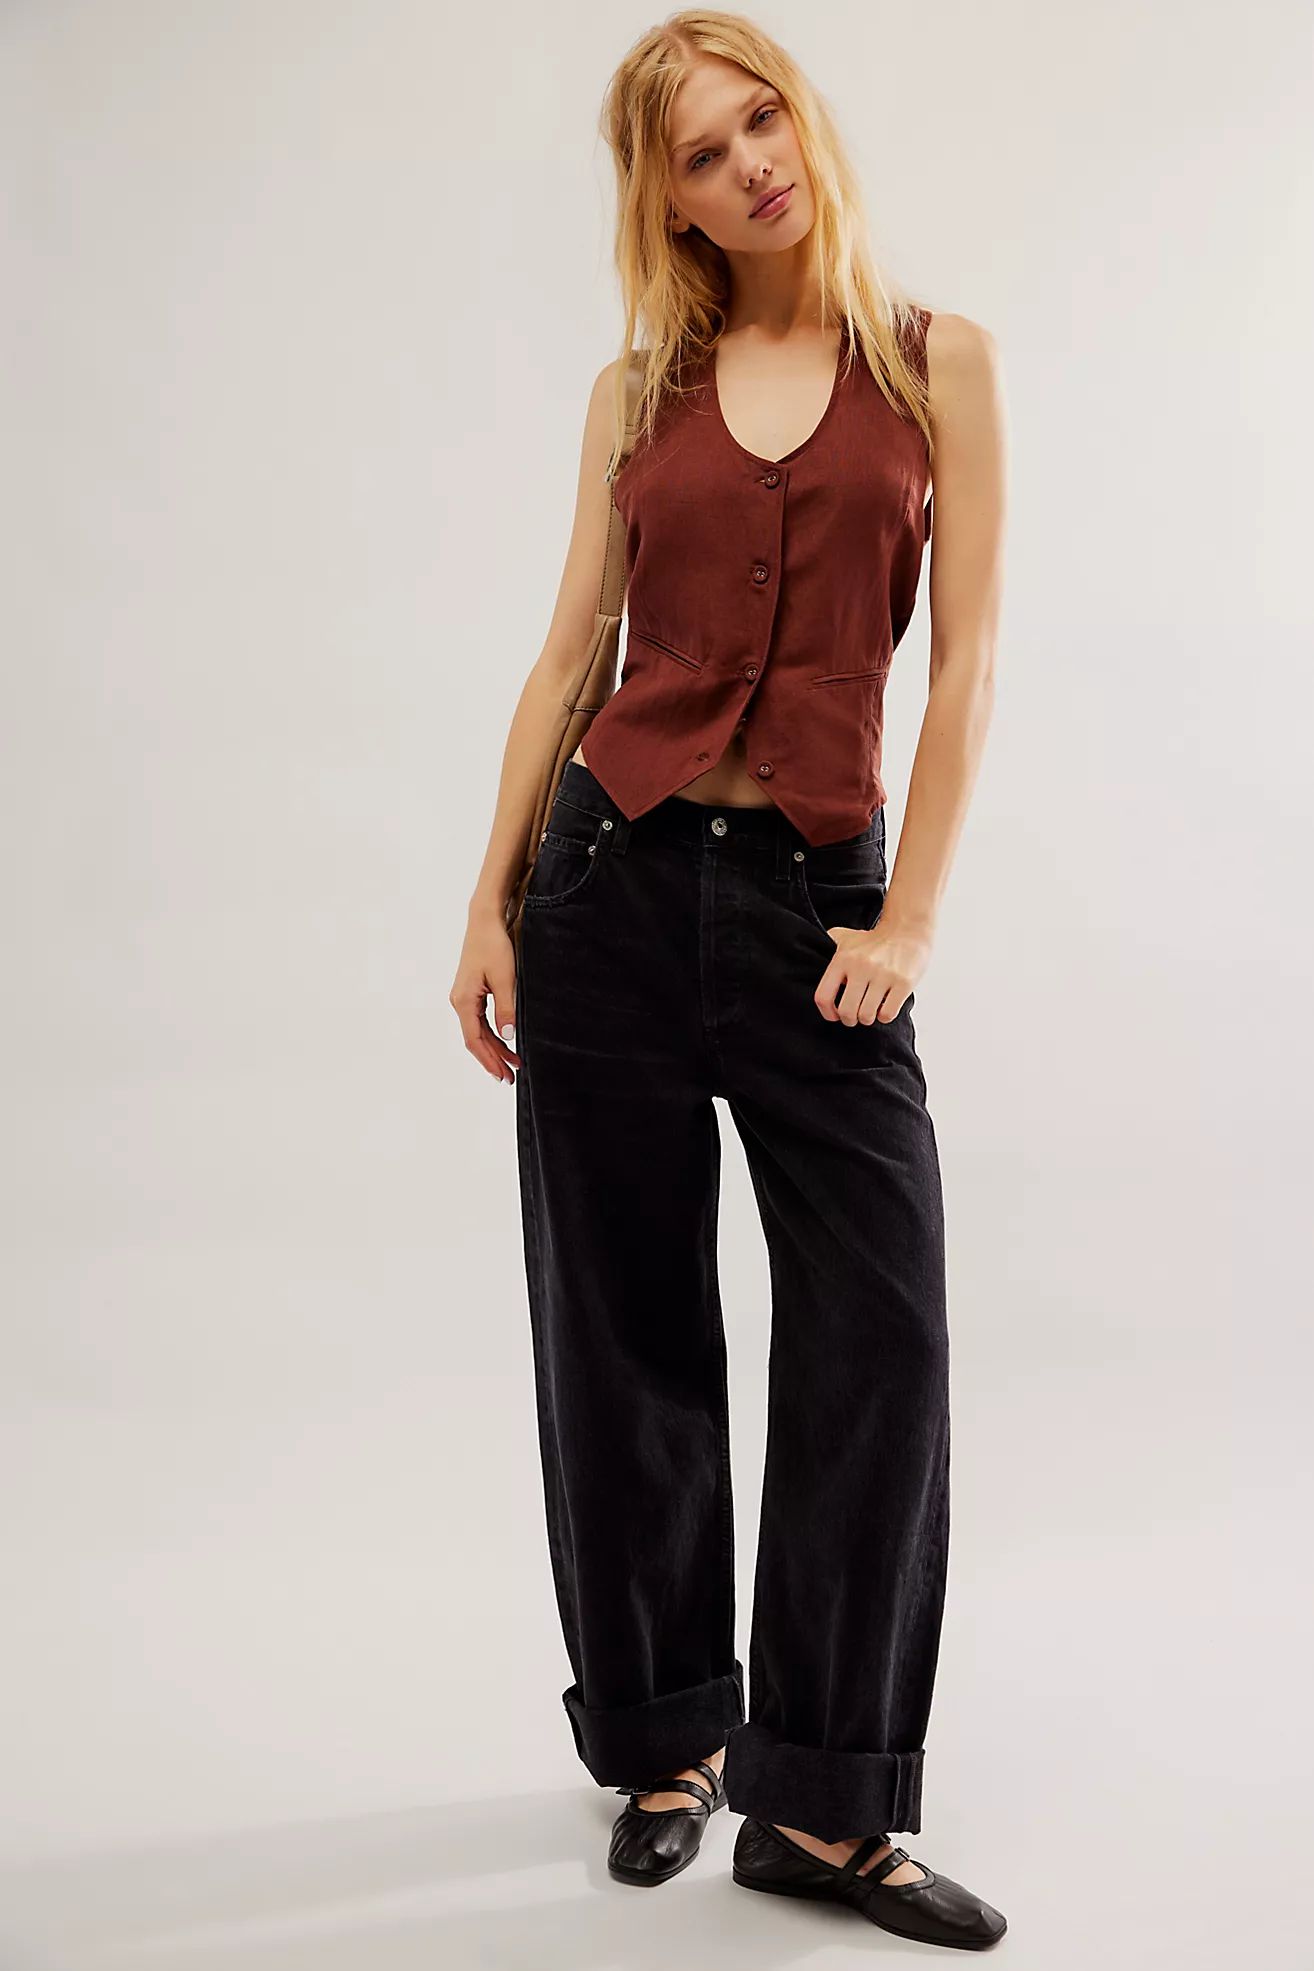 Citizens of Humanity Ayla Baggy Cuffed Crop Jeans | Free People (UK)